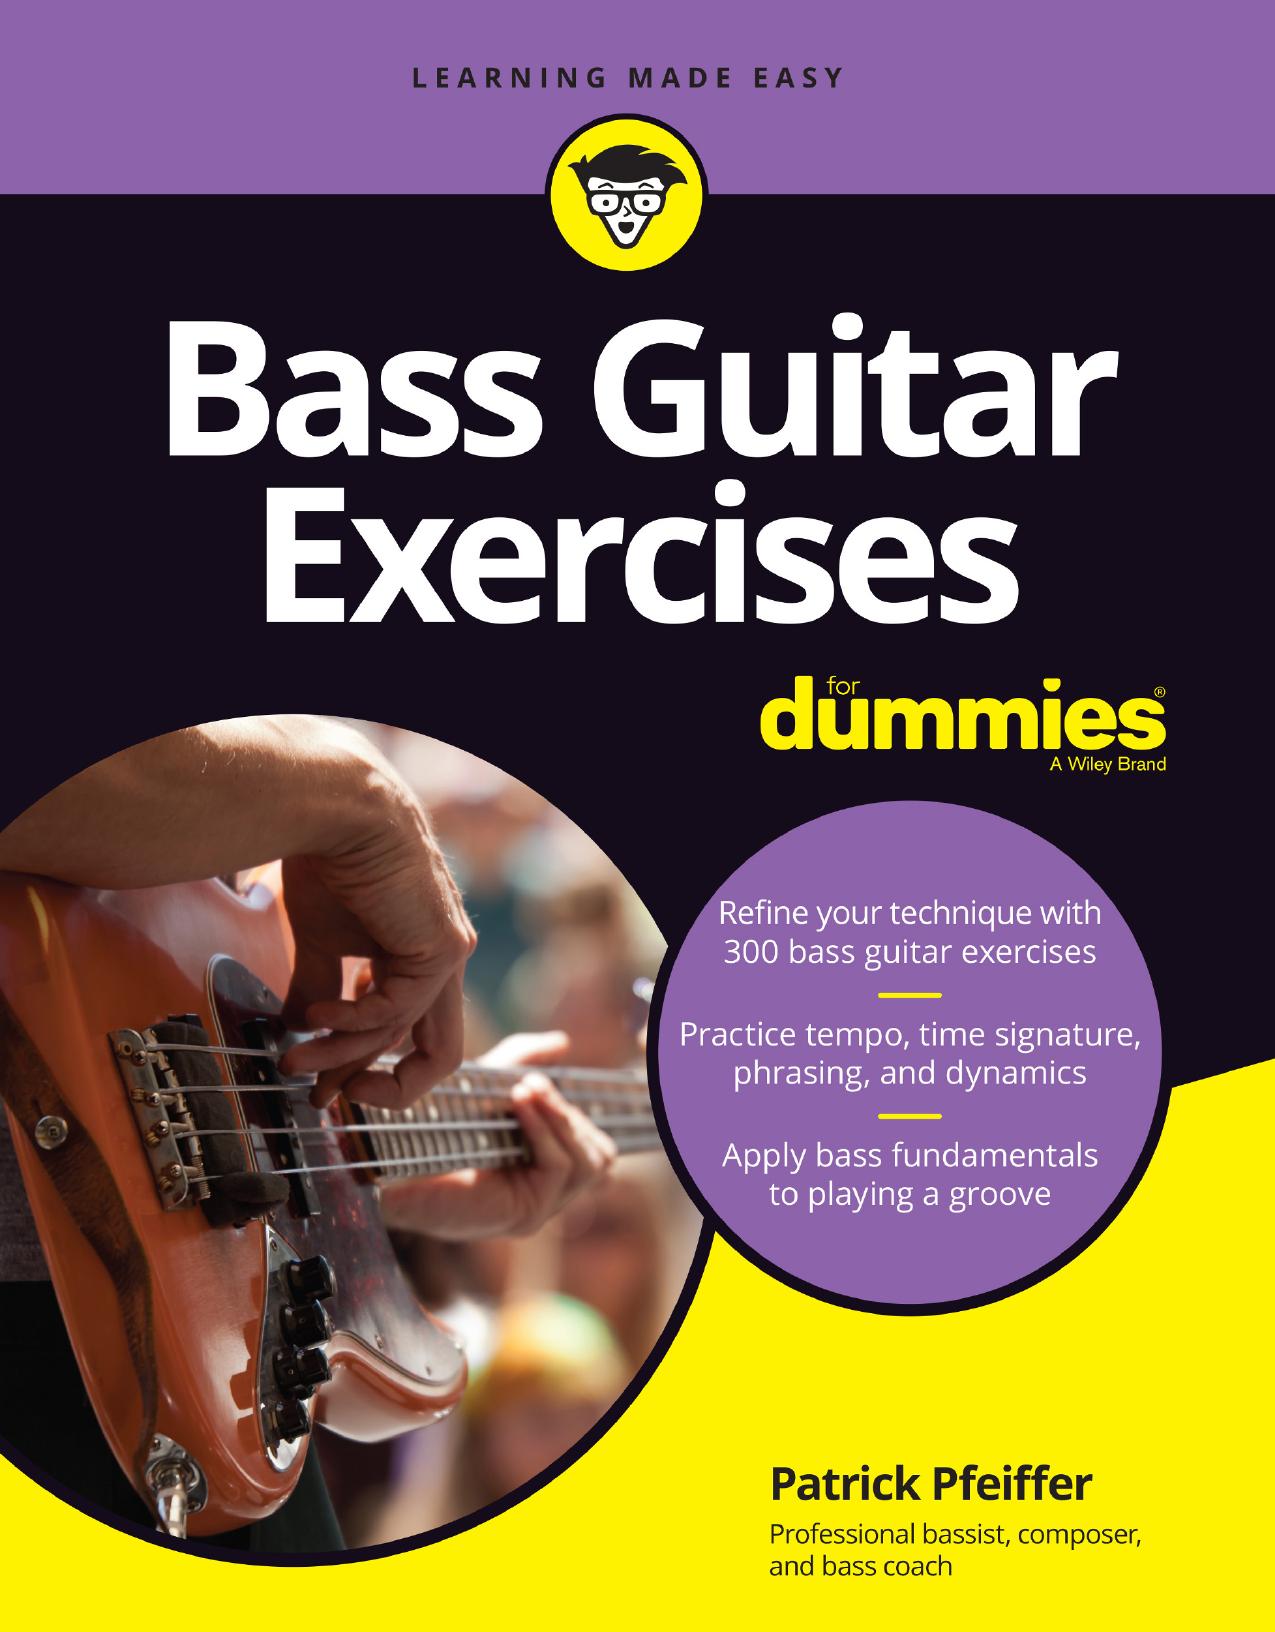 Download Bass Guitar Exercises For Dummies (True PDF) - SoftArchive